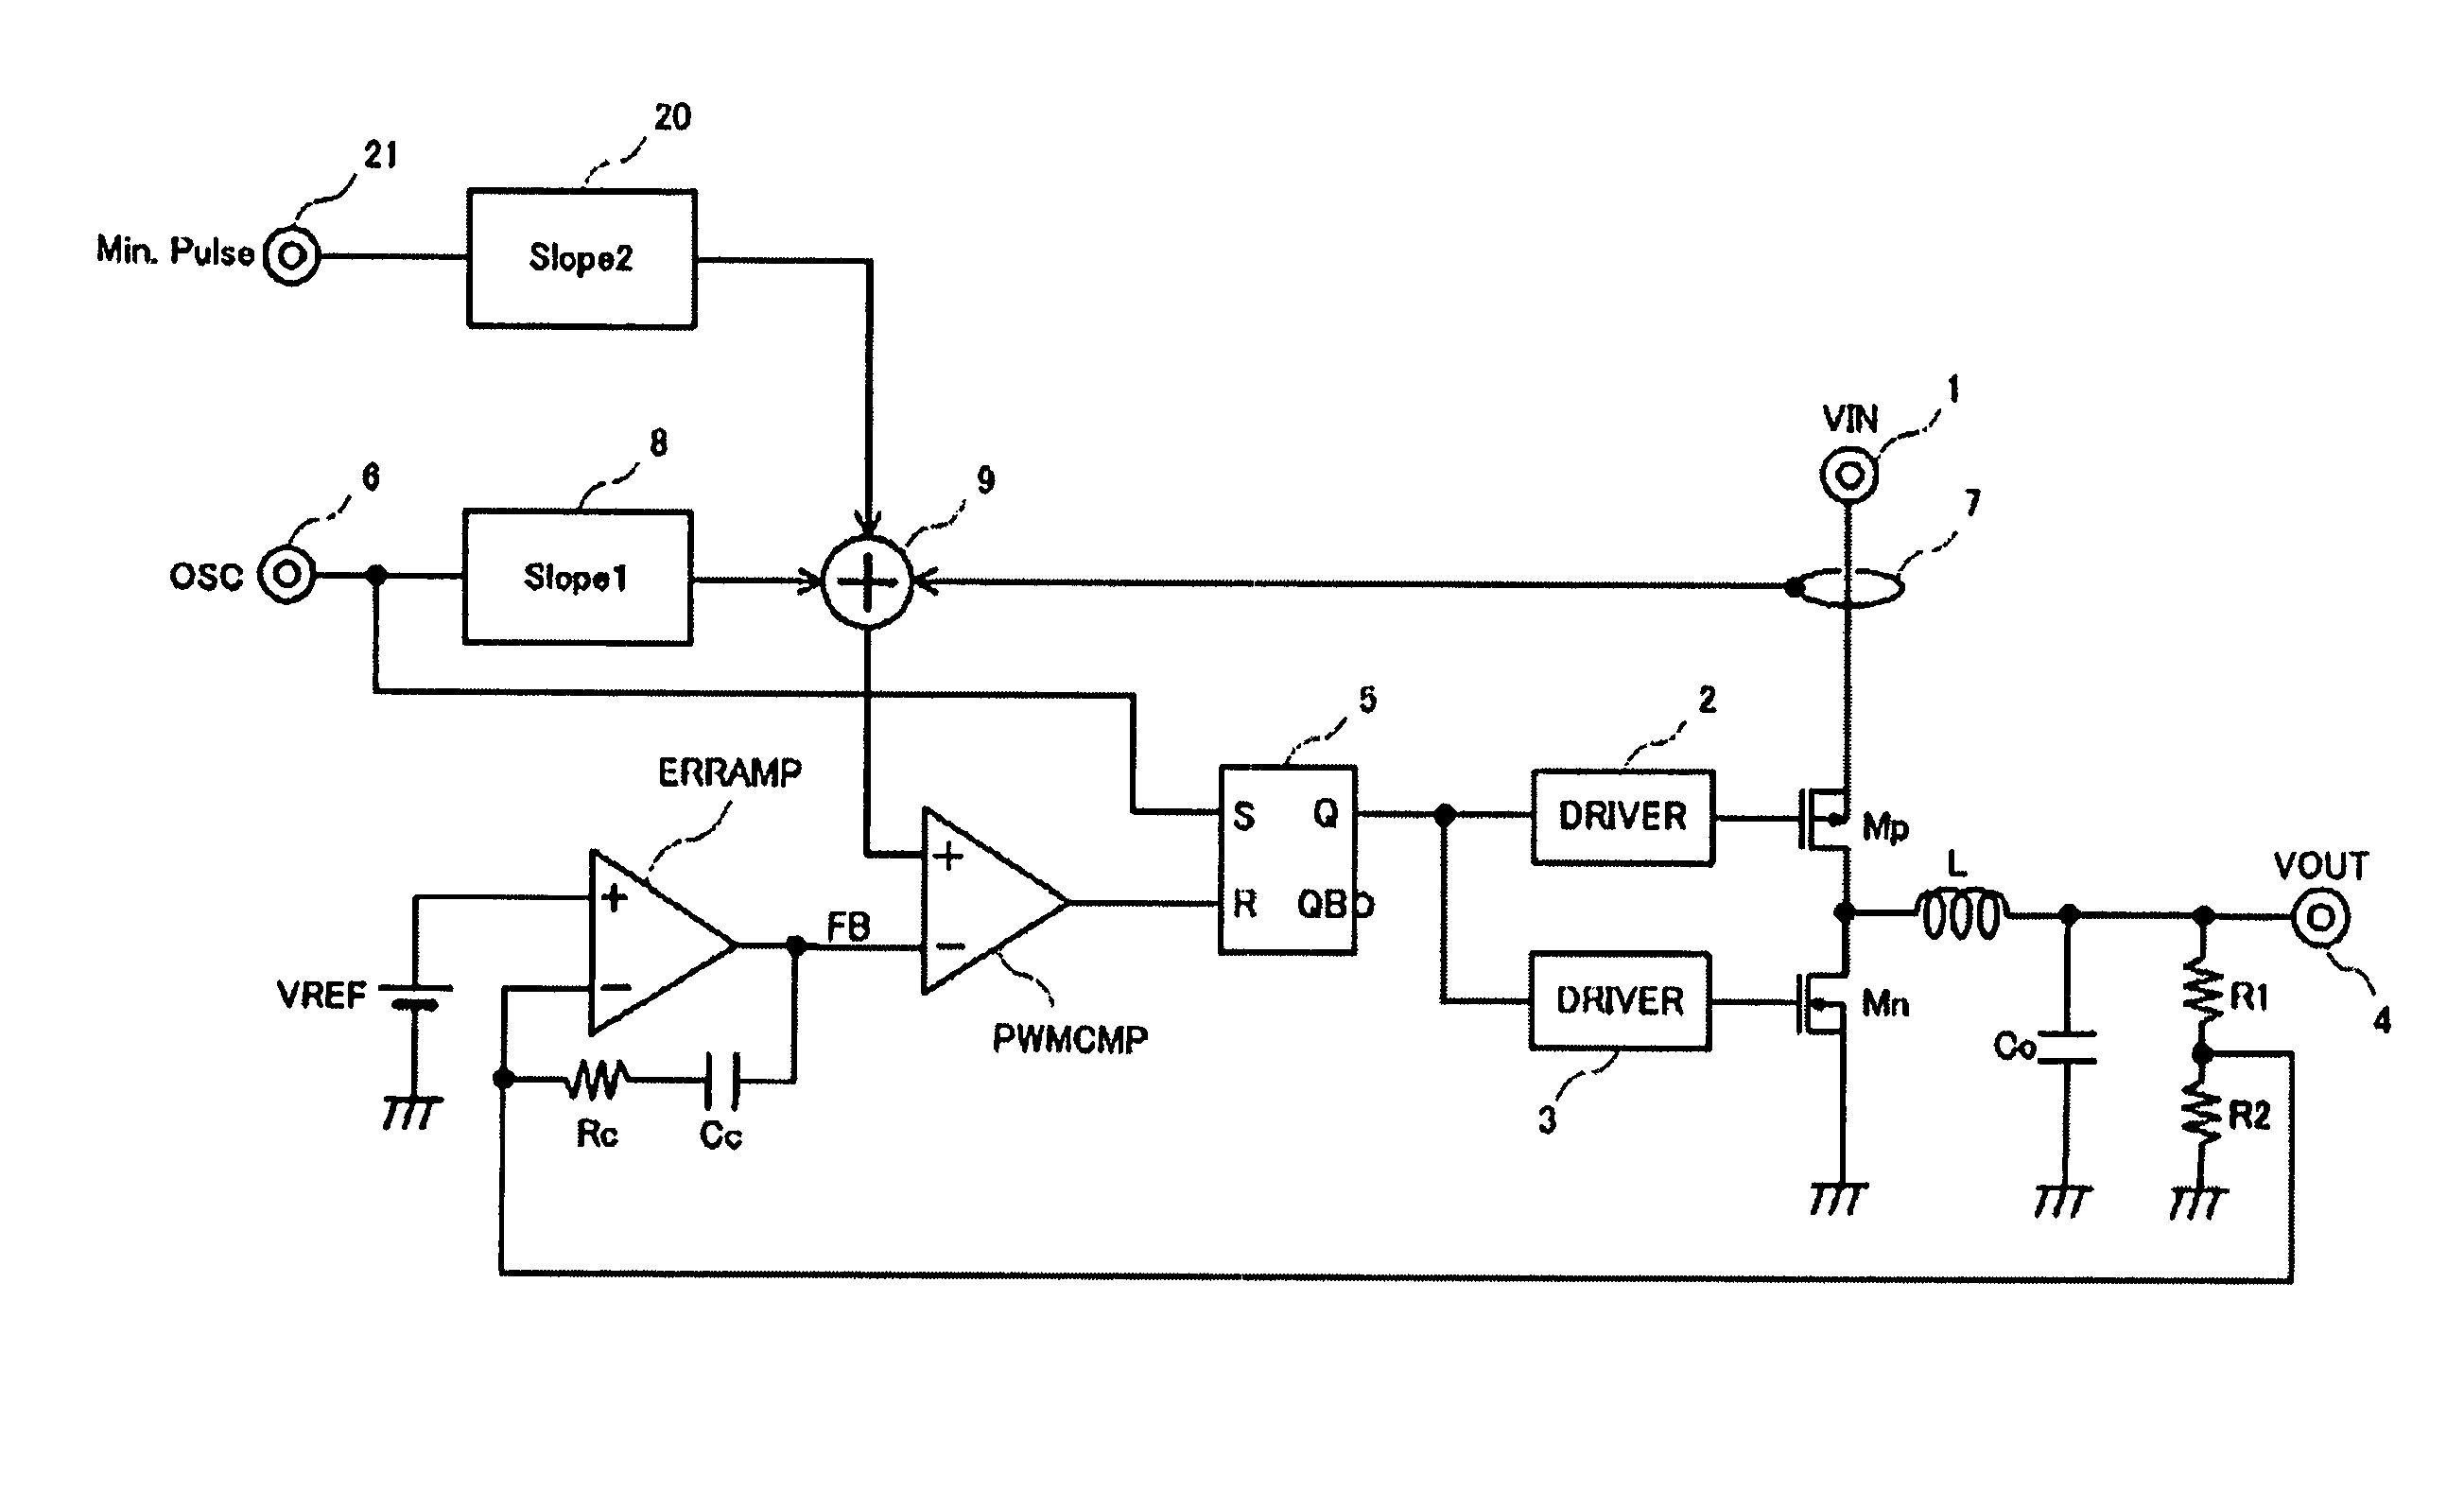 Switching power supply with slope compensation circuit and added slope circuit